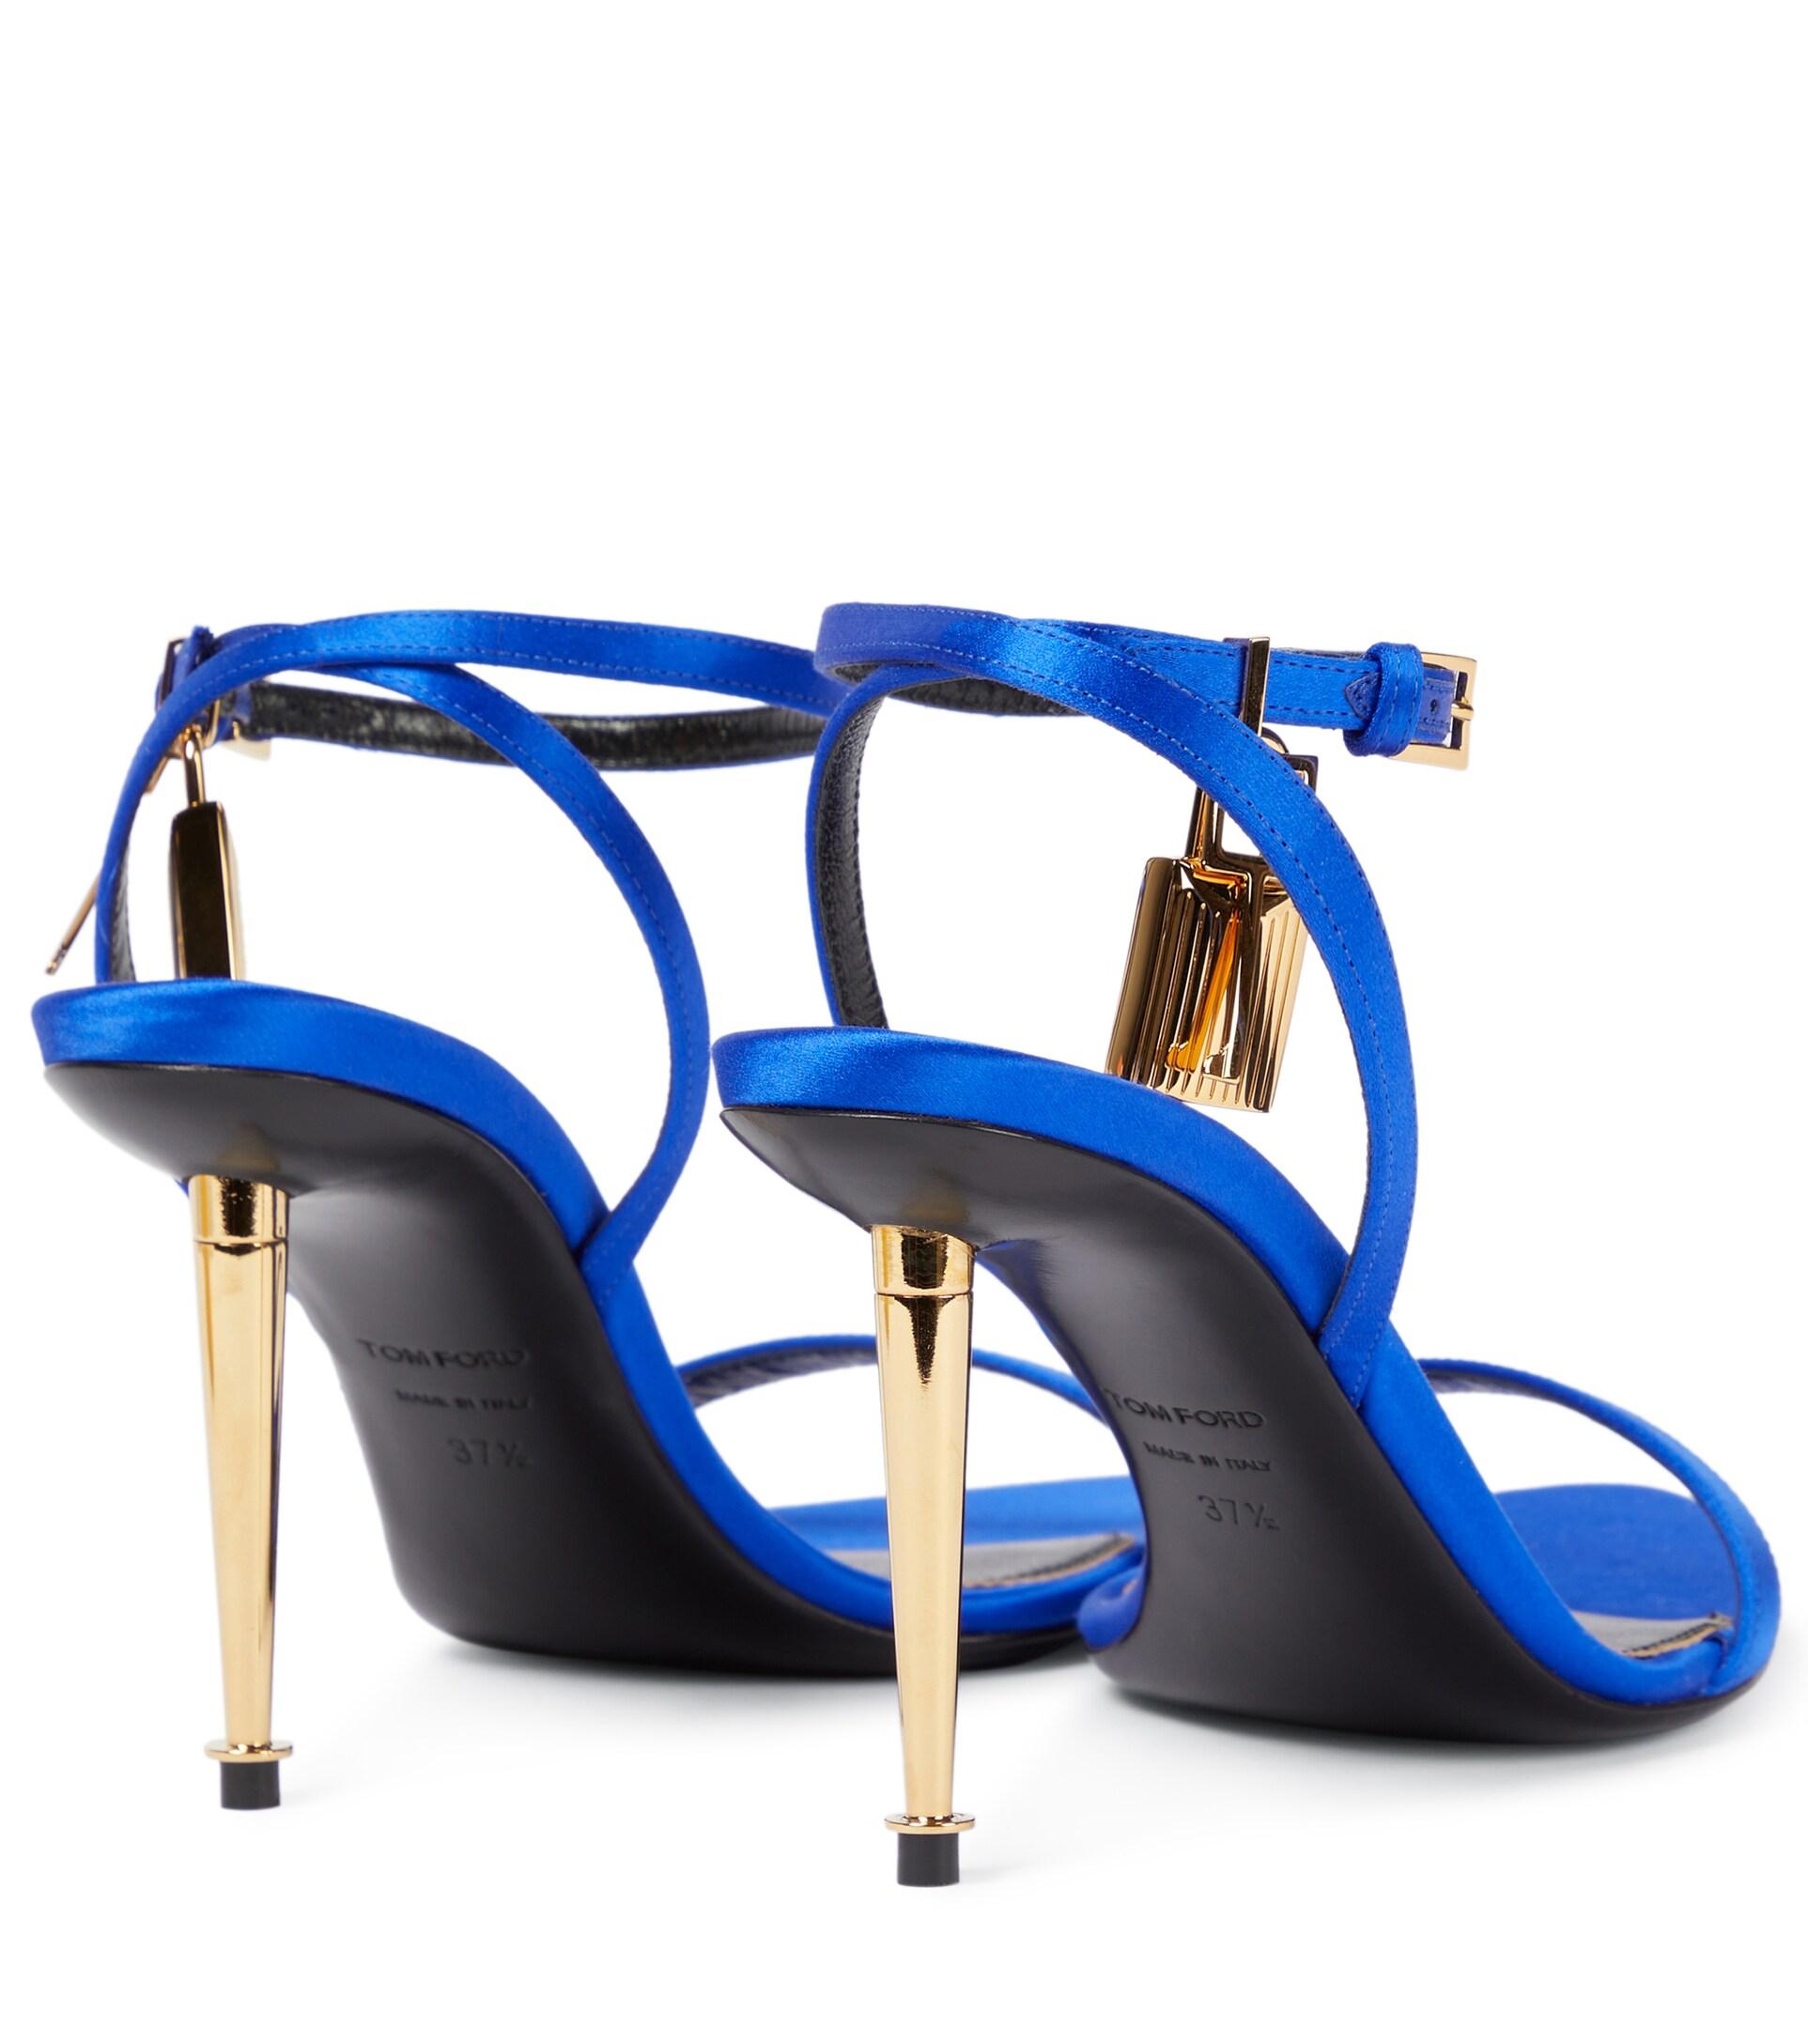 Guess Electric Blue Patent Heel | Patent heels, Heels, Electric blue